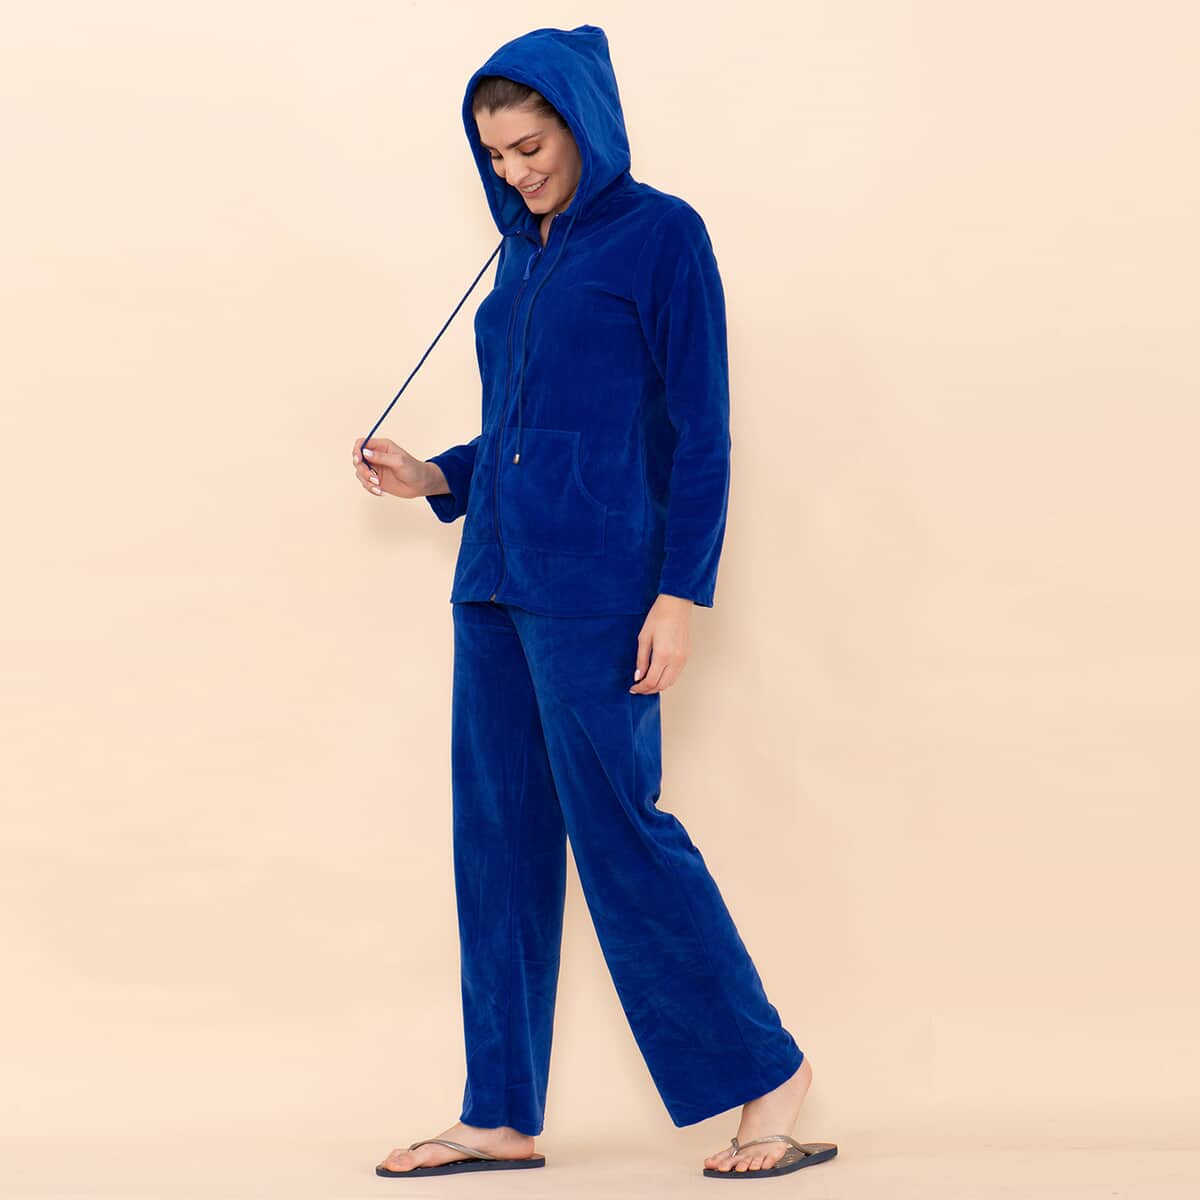 TAMSY LUX Blue Velour Track Suit Set - S image number 5